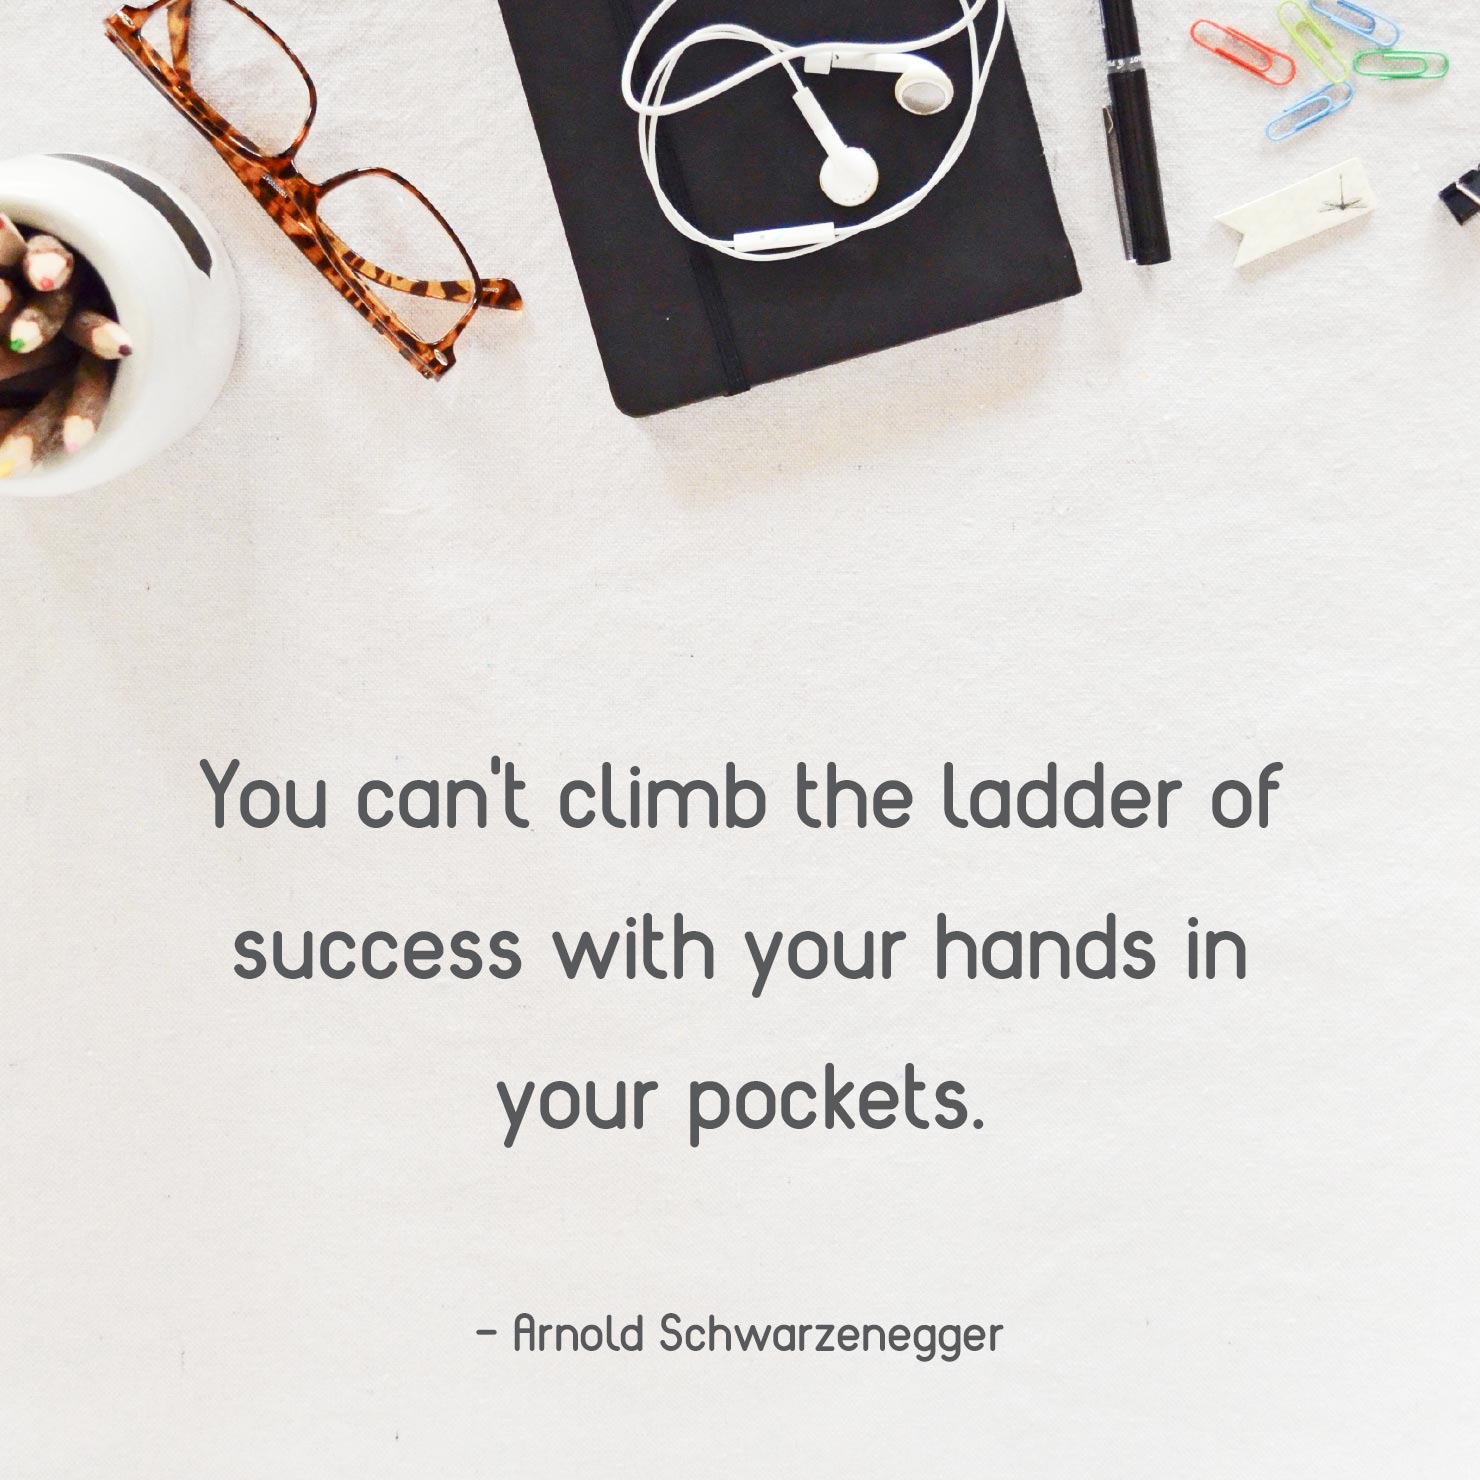 short graduation quote: you can't climb the ladder of success with your hands in your pockets - Arnold Schwarzenegger